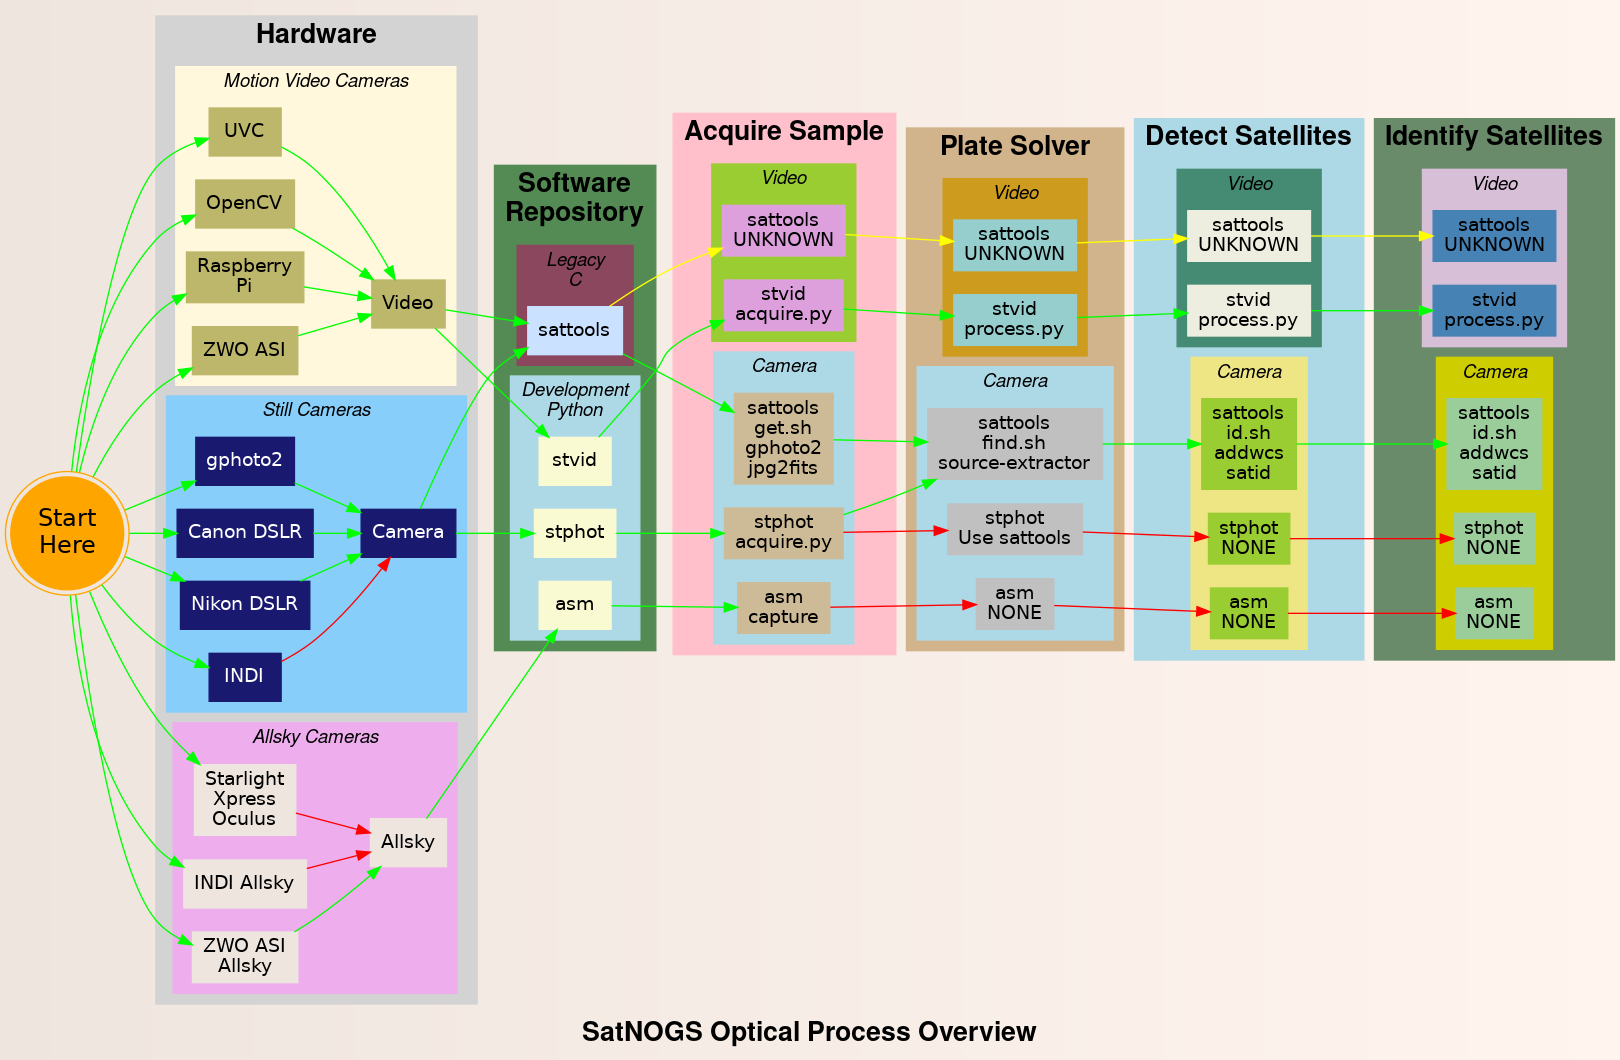 SatNOGS Optical Process Overview